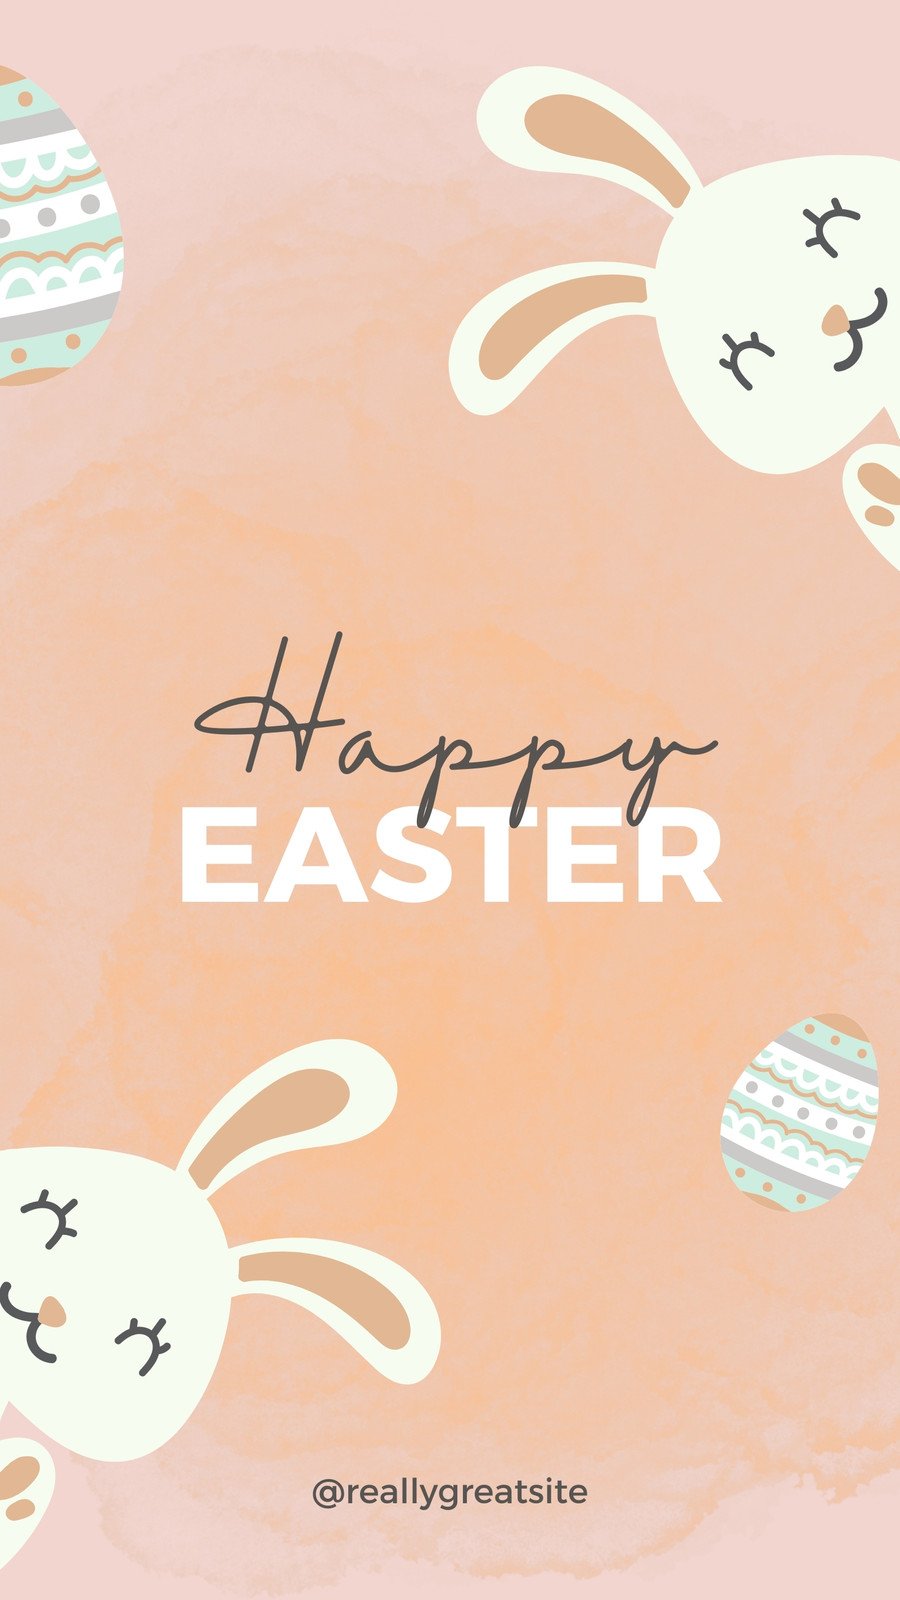 Cute Easter Bunny with Colorful Eggs 4K wallpaper download